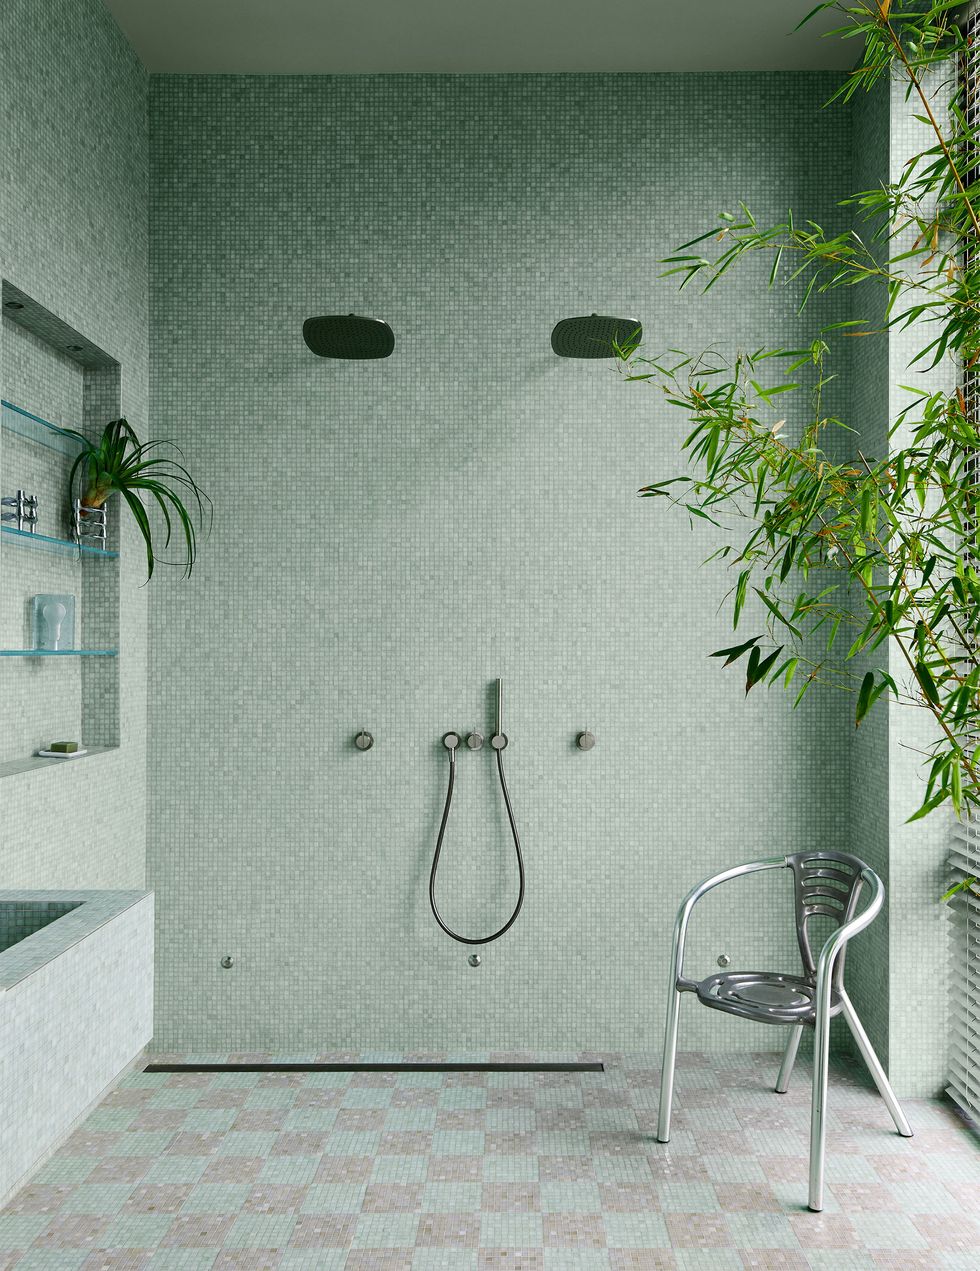 the walls of a bathroom are done in very small sea foam colored square glass tiles and the floor has larger two toned squares, inset glass shelves, dual rain showerheads, and a vintage aluminum chair